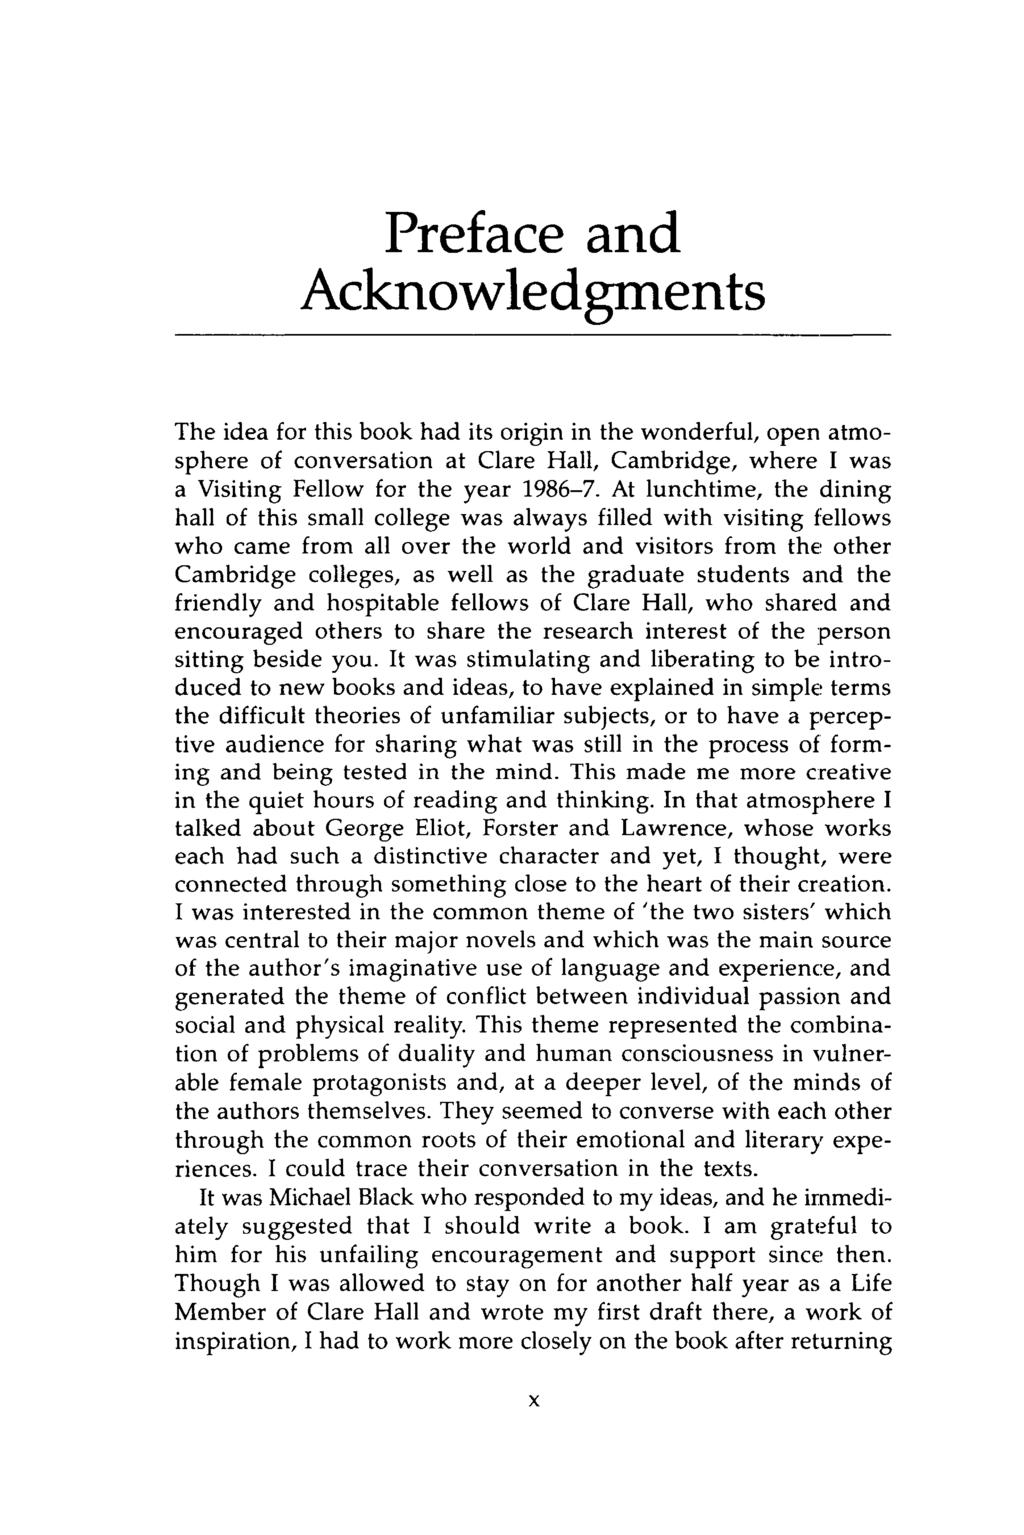 Preface and Acknowledgments The idea for this book had its origin in the wonderful, open atmosphere of conversation at Clare Hall, Cambridge, where I was a Visiting Fellow for the year 1986-7.